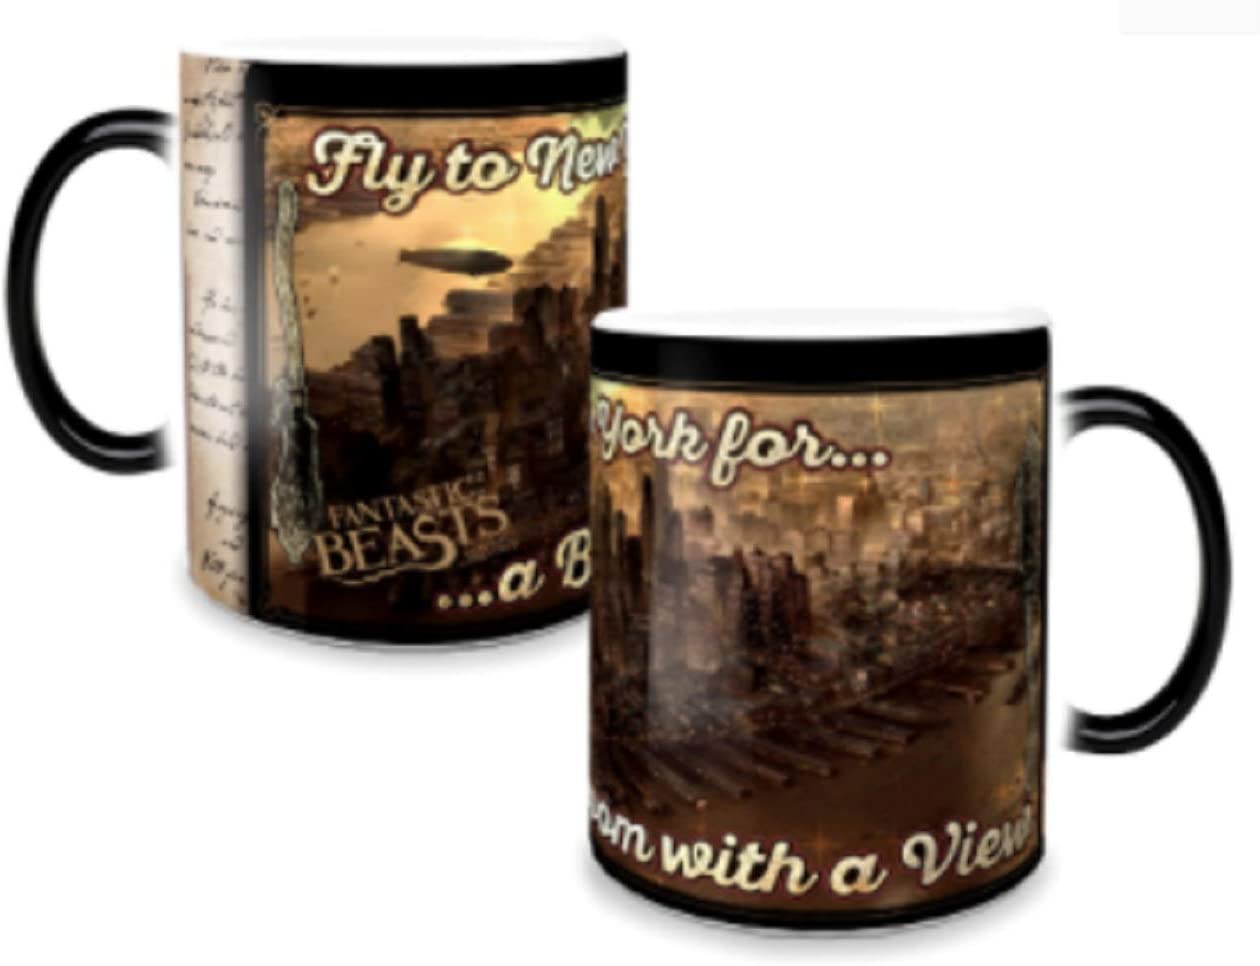 Fantastic Beasts and Where to Find Them (Broom with a View) Morphing Mugs Heat-Sensitive Mug MMUG408